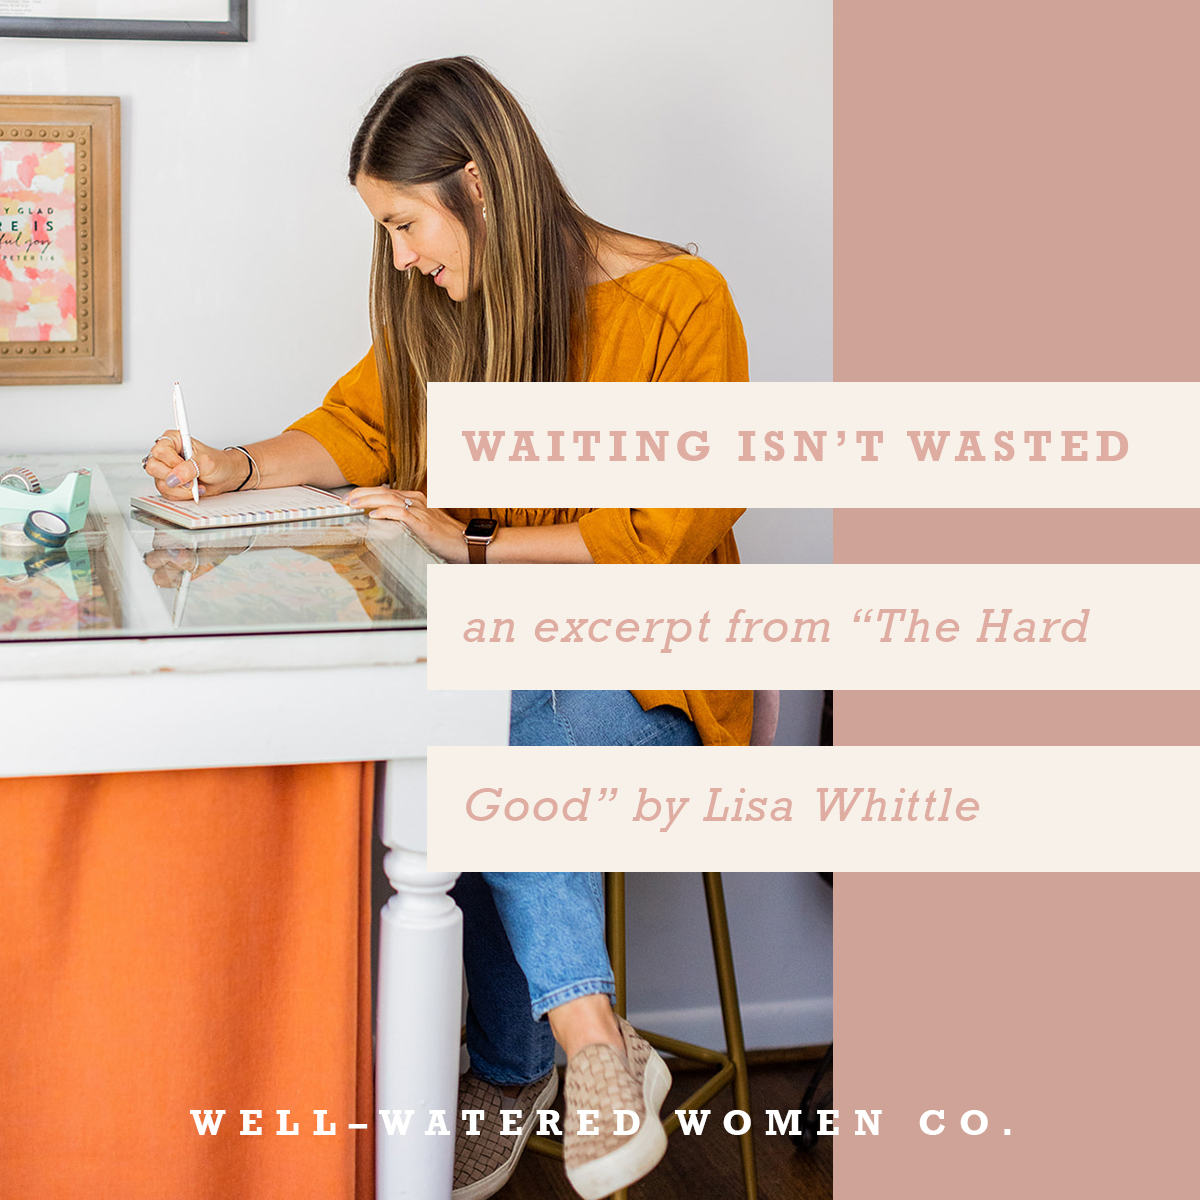 Waiting Isn't Wasted–an Article by Well-Watered Women